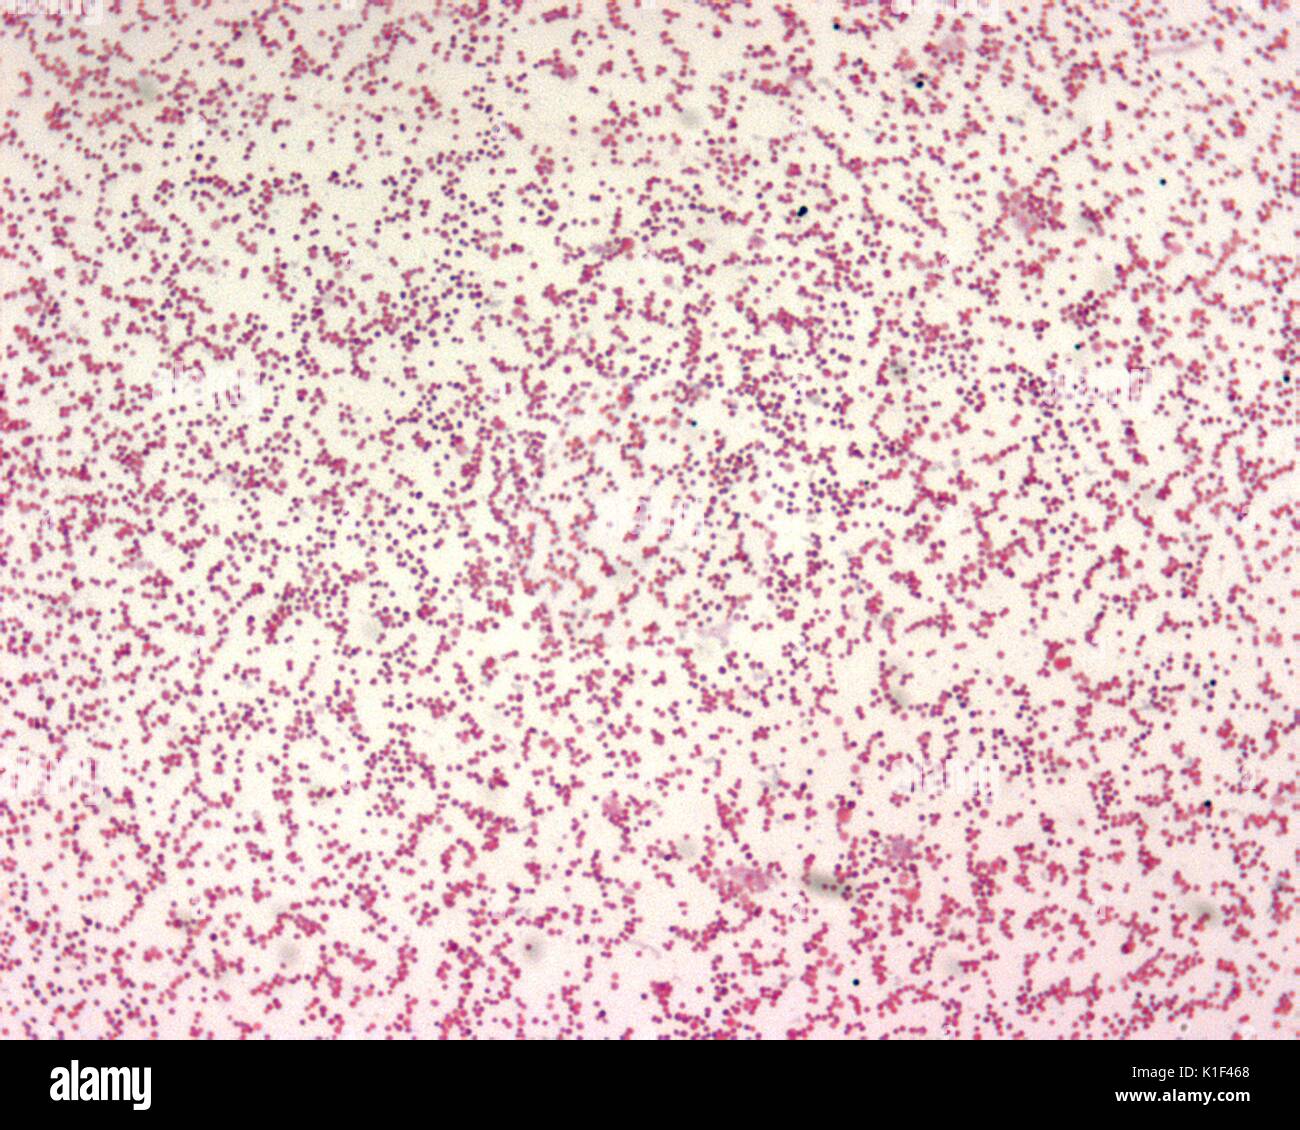 Francisella tularensis is Gram-negative in its staining morphology. Francisella tularensis is a poorly staining, very tiny gram-negative coccobacillus (0.2-0.7 {micro}m), seen mostly as single cells. Bipolar staining is not a distinctive feature. Image courtesy CDC/Courtesy of Larry Stauffer, Oregon State Public Health Laboratory, 2002. Stock Photo